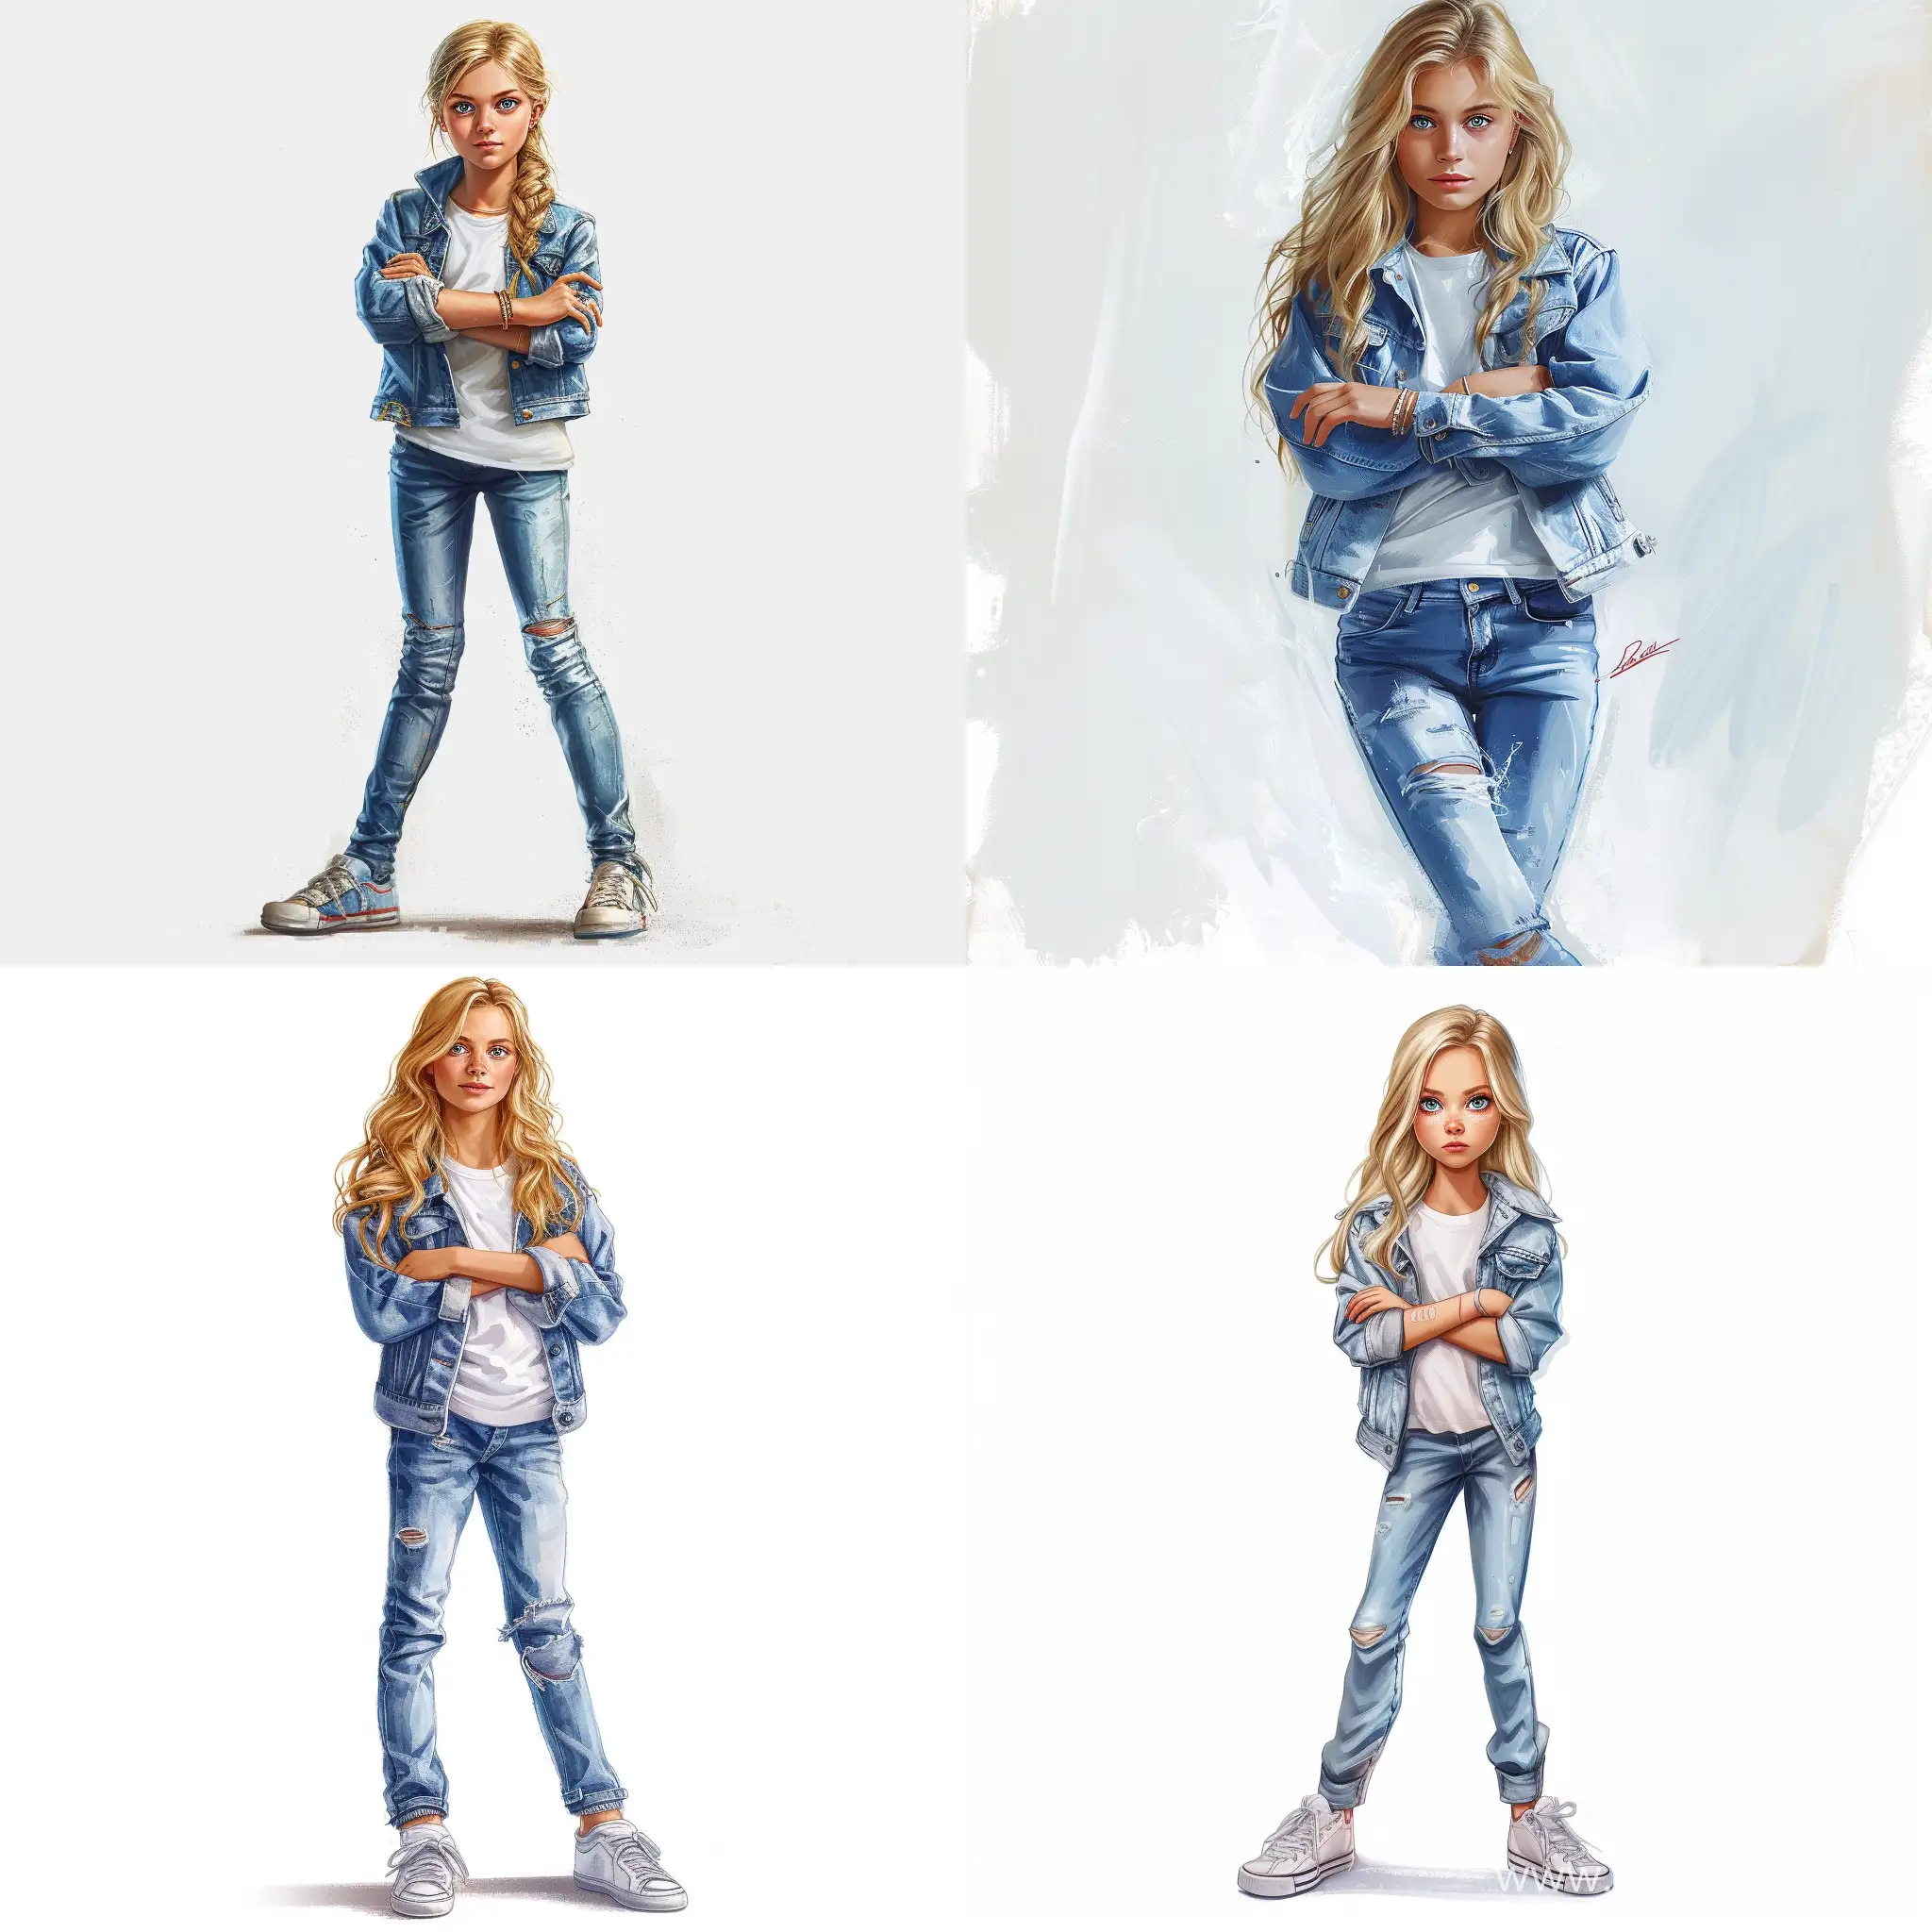 Beautiful girl, blonde hair, blue eyes, white skin, teenager, 15 years old, jeans jacket, jeans, white T-shirt, sneakers, cool, folded arms, high quality, high detail, realistic art